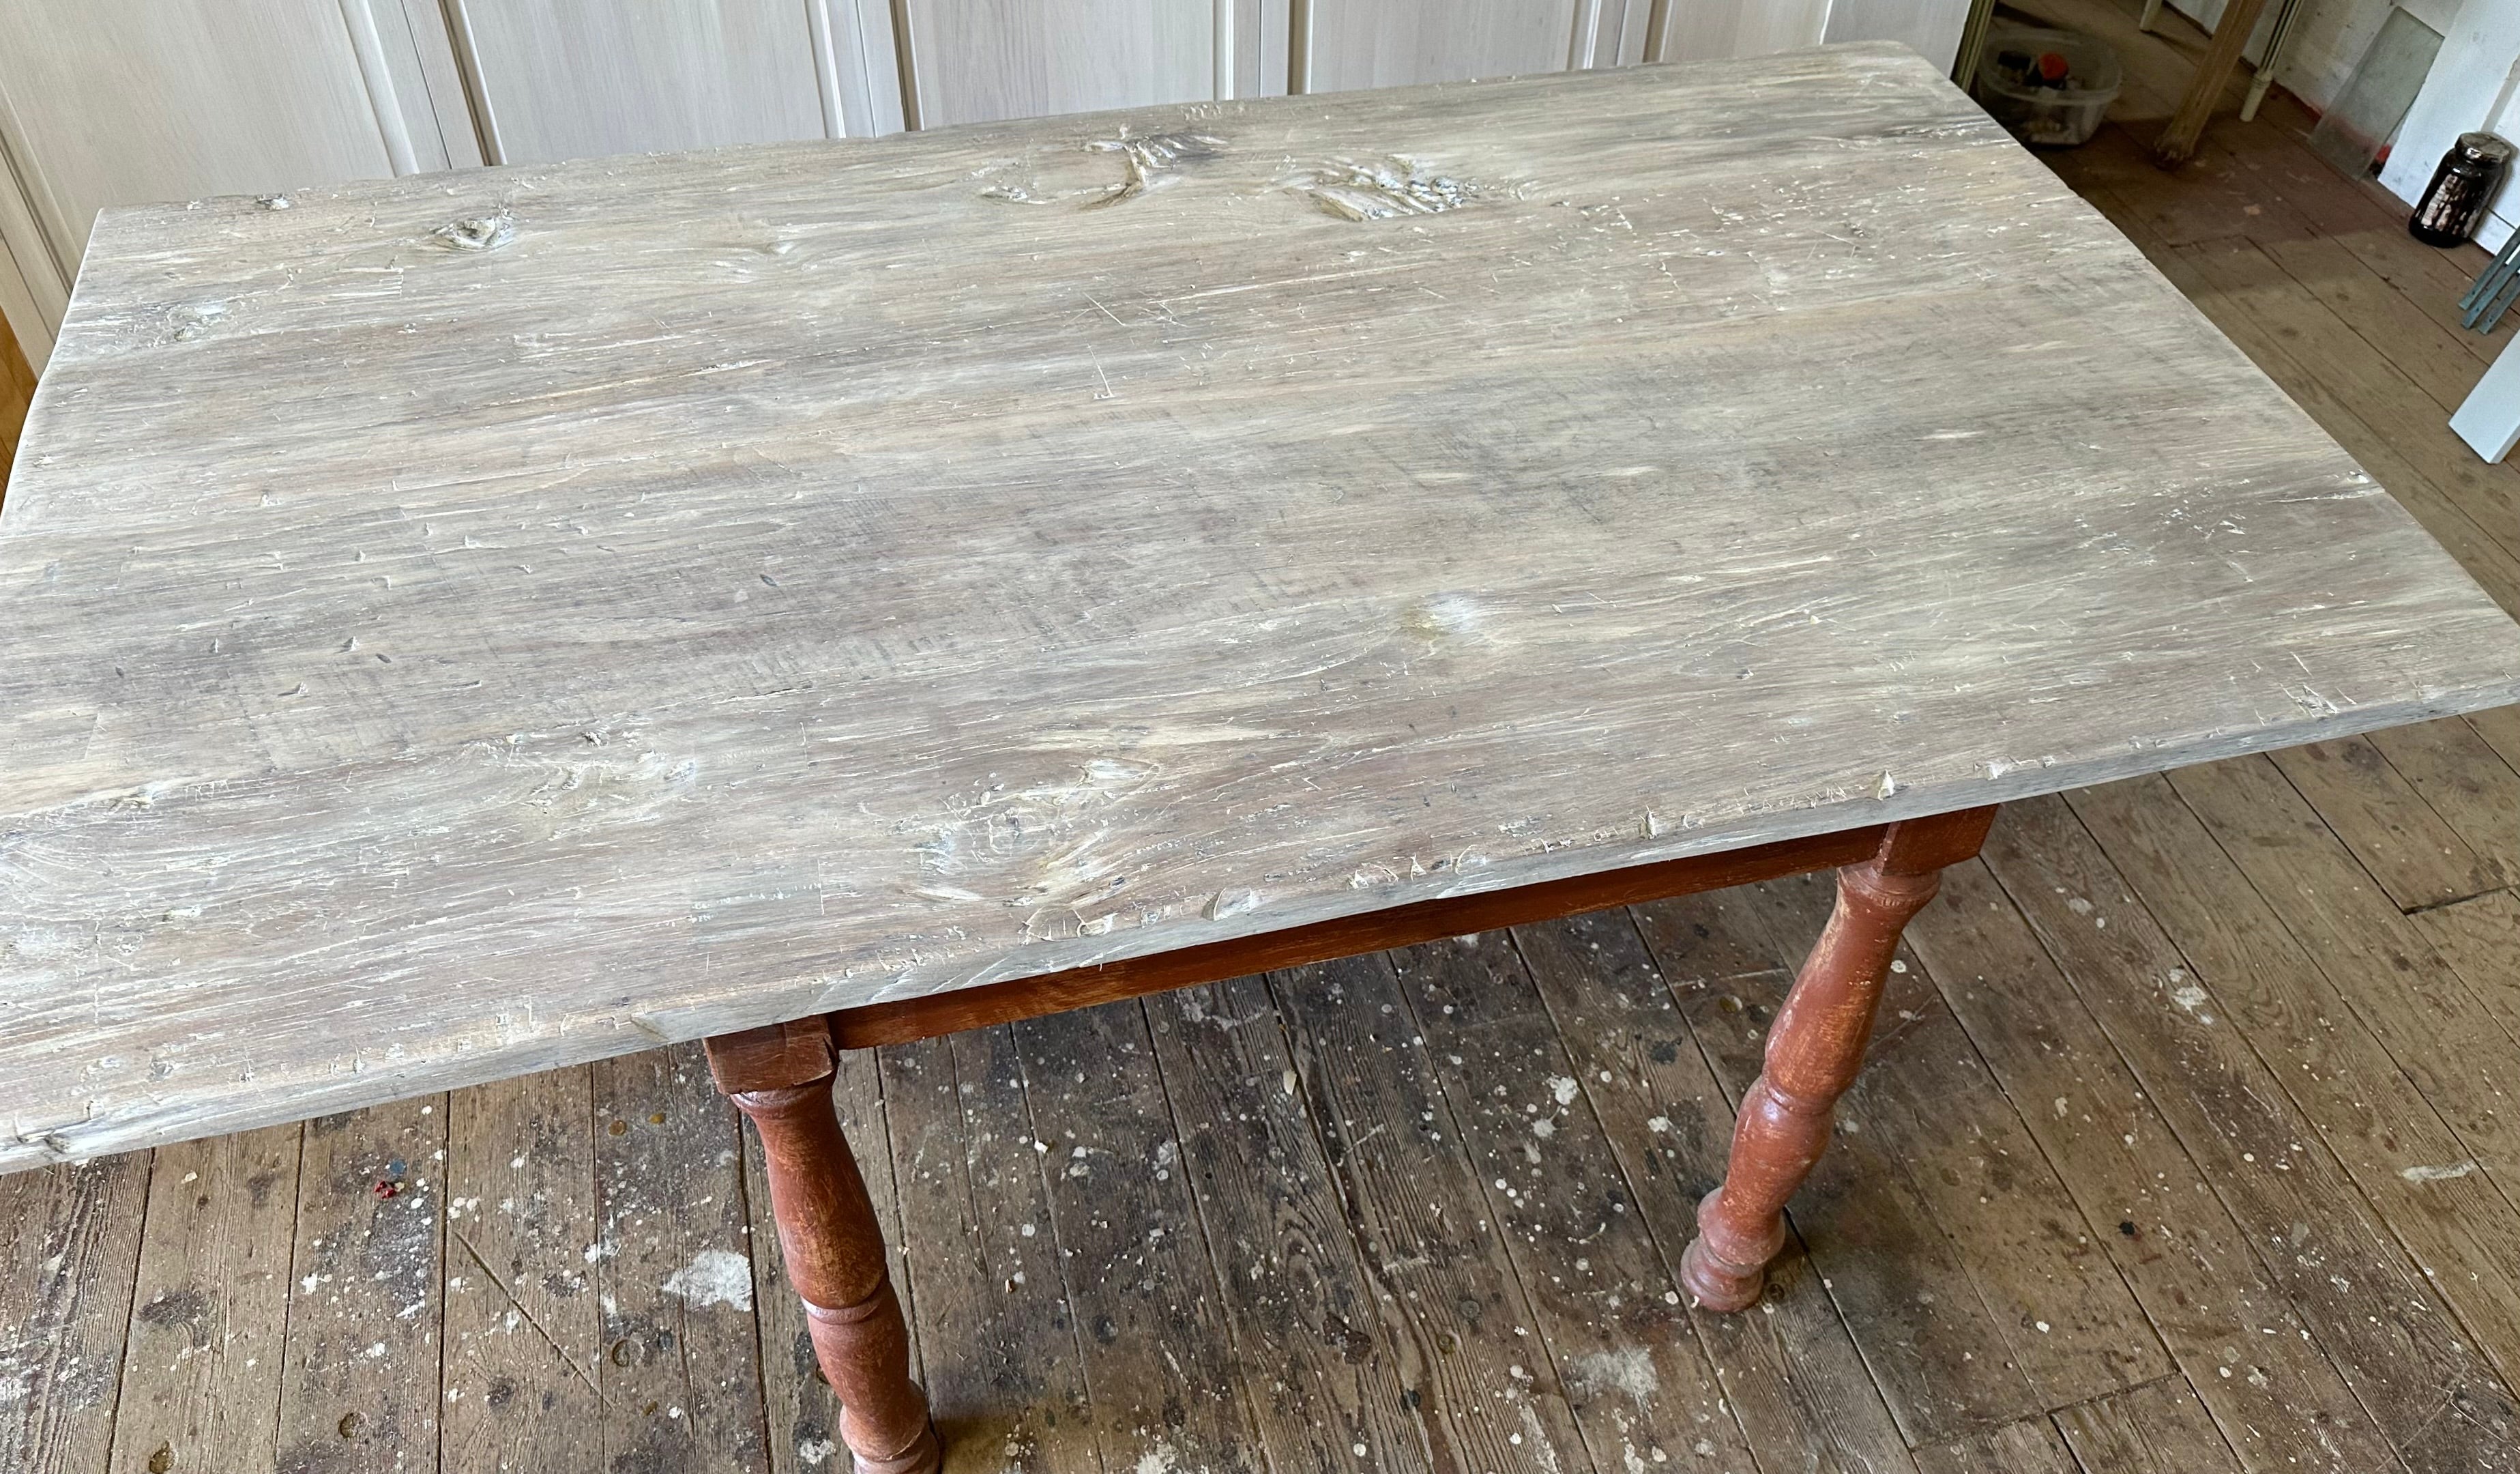 A timeless Swedish Gustavian inspired painted farmhouse table made with reclaimed whitewashed wood table top and a red painted colored wood table base. The table makes a perfect addition to any kitchen or dining room. Natural and rustic in